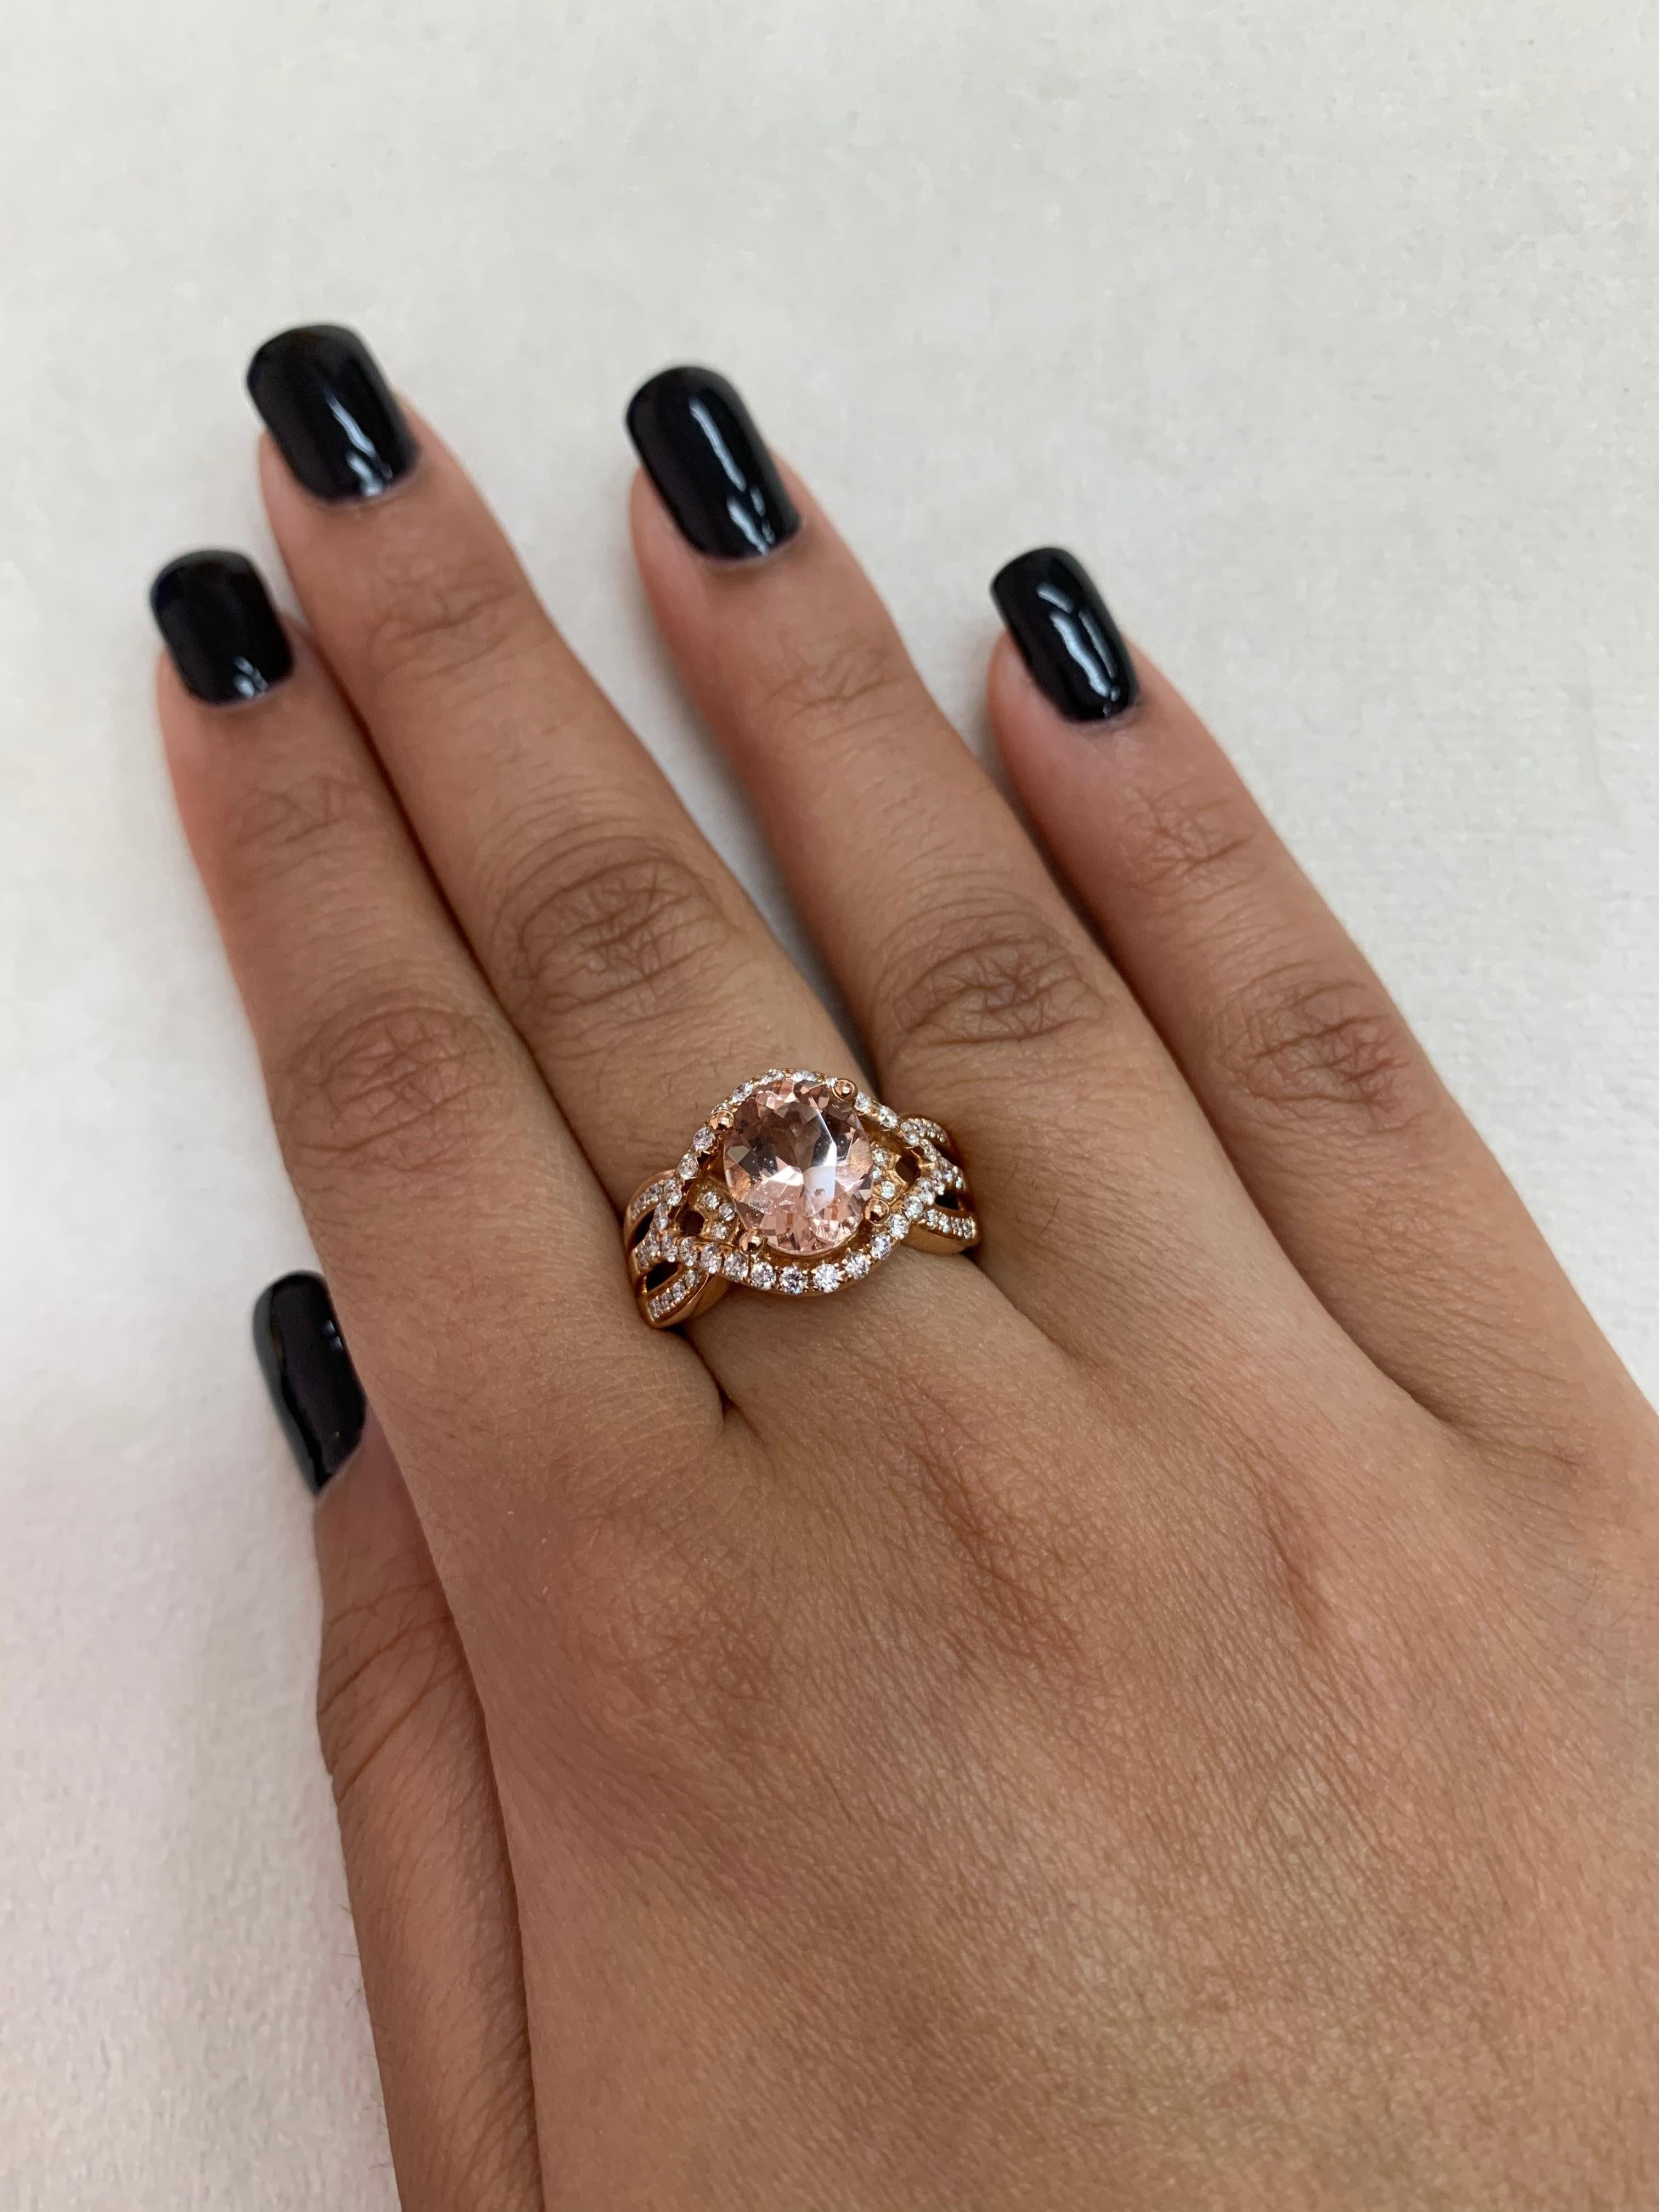 This collection features an array of magnificent morganites! Accented with diamonds these rings are made in rose gold and present a classic yet elegant look. 

Classic morganite ring in 18K rose gold with diamonds. 

Morganite: 2.54 carat oval